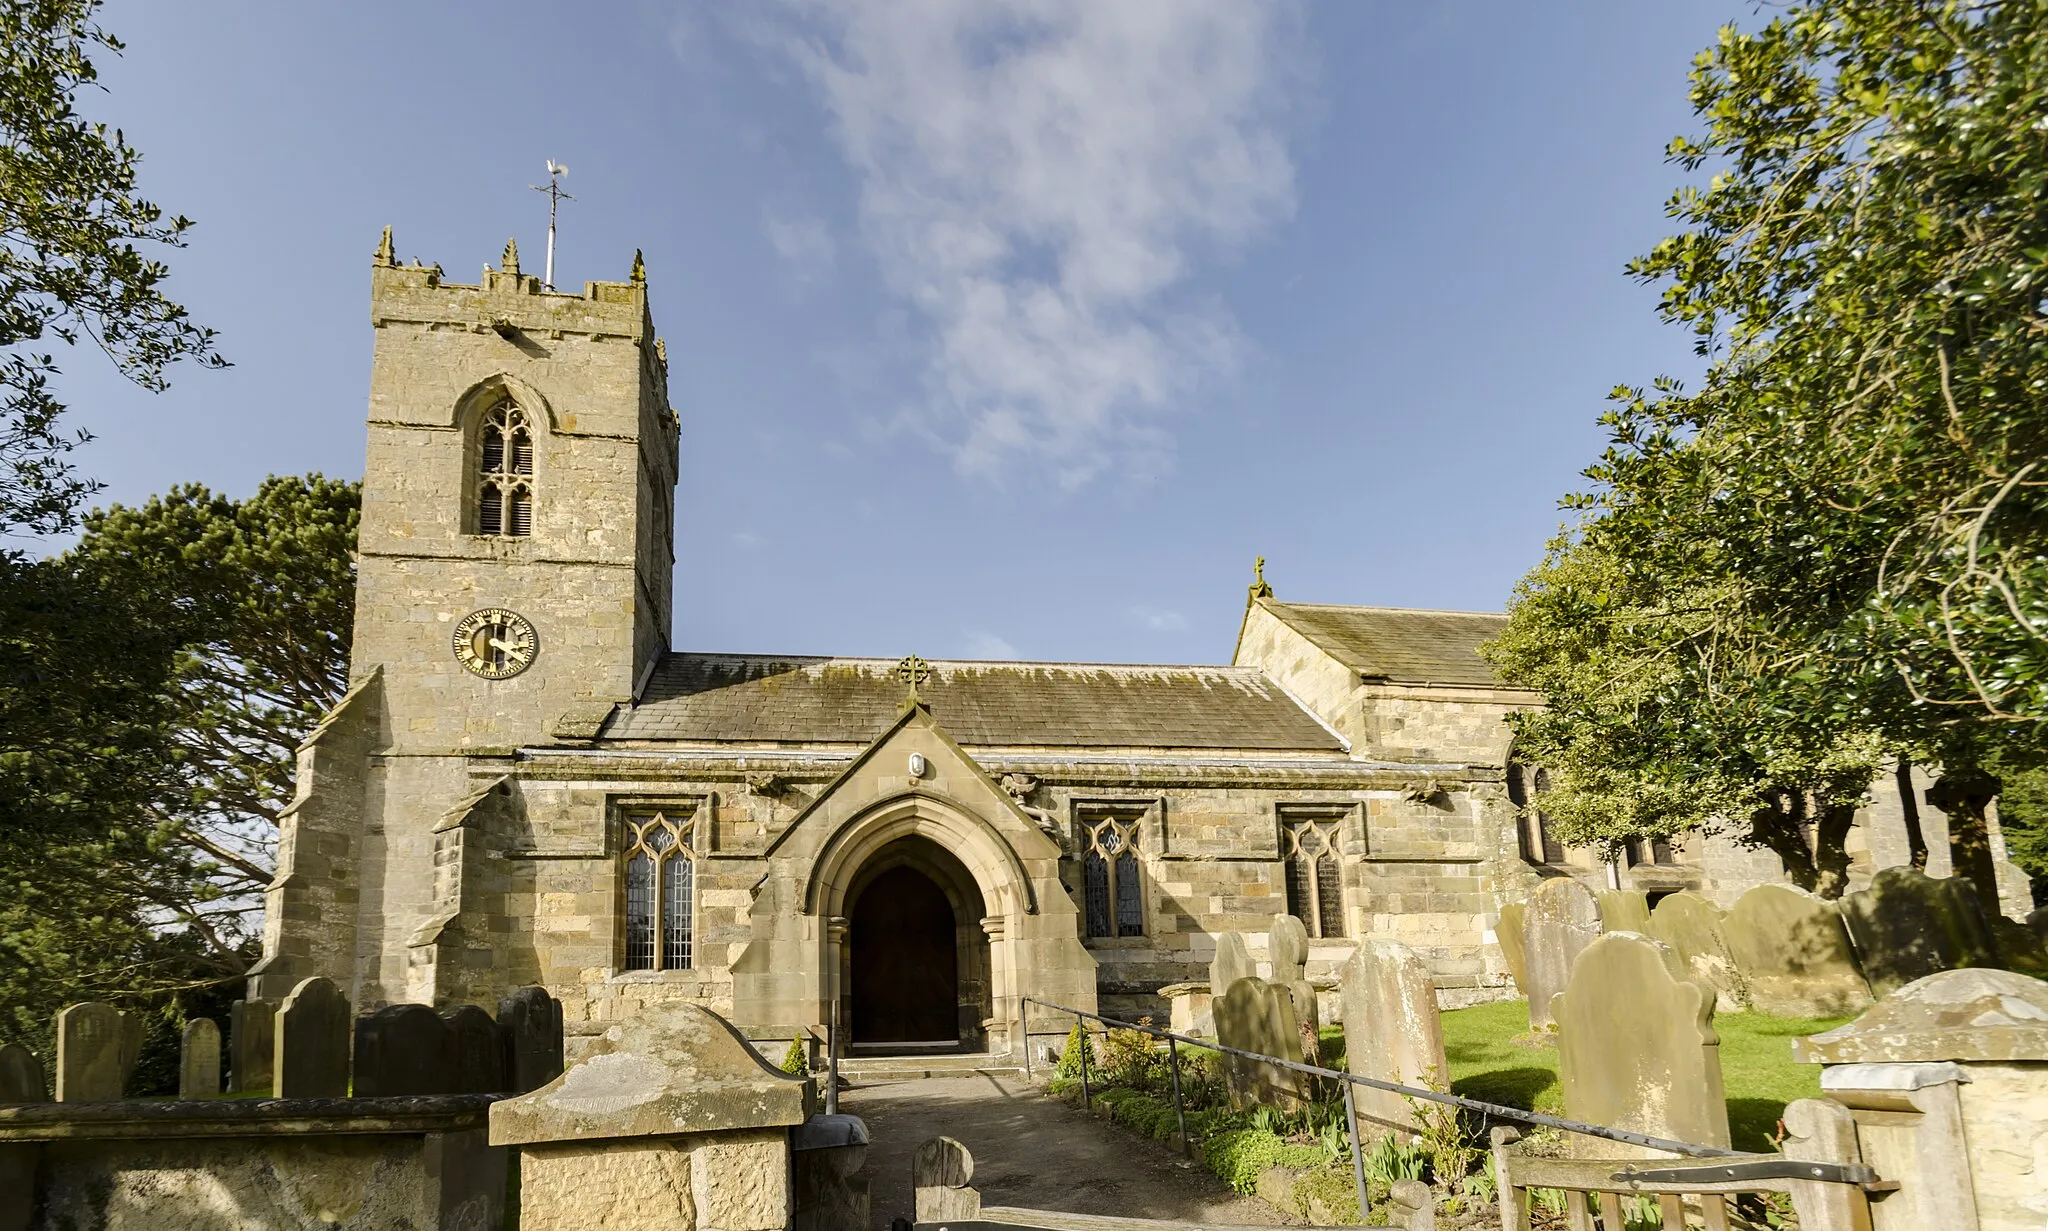 Photo showing: The church is placed in a commanding position dating back to pre-Norman times. The original church was destroyed after the Conquest and rebuilt around 1100. It was extended in the early 14th century.
The present church dates from the decorated period, with a 14th century western tower, south porch, nave with north and south aisles from the 15th century, and chancel, which was rebuilt in 1866 during general restoration of the church.
The tower is of four stages with battlements and crocketted pinnacles. There are squinches within the tower for a spire which was never built.
The nave has four bay arcades with piers of four major and four minor shafts. There is a piscina at the east end of the south aisle.
In the chancel there is a recess in the north wall with the effigy of a lady, possibly Lady Beatrice Hastings from the early 14th century. The chancel also contains a piscina and a sedilia which is restored.

The font dates from the original Norman church.